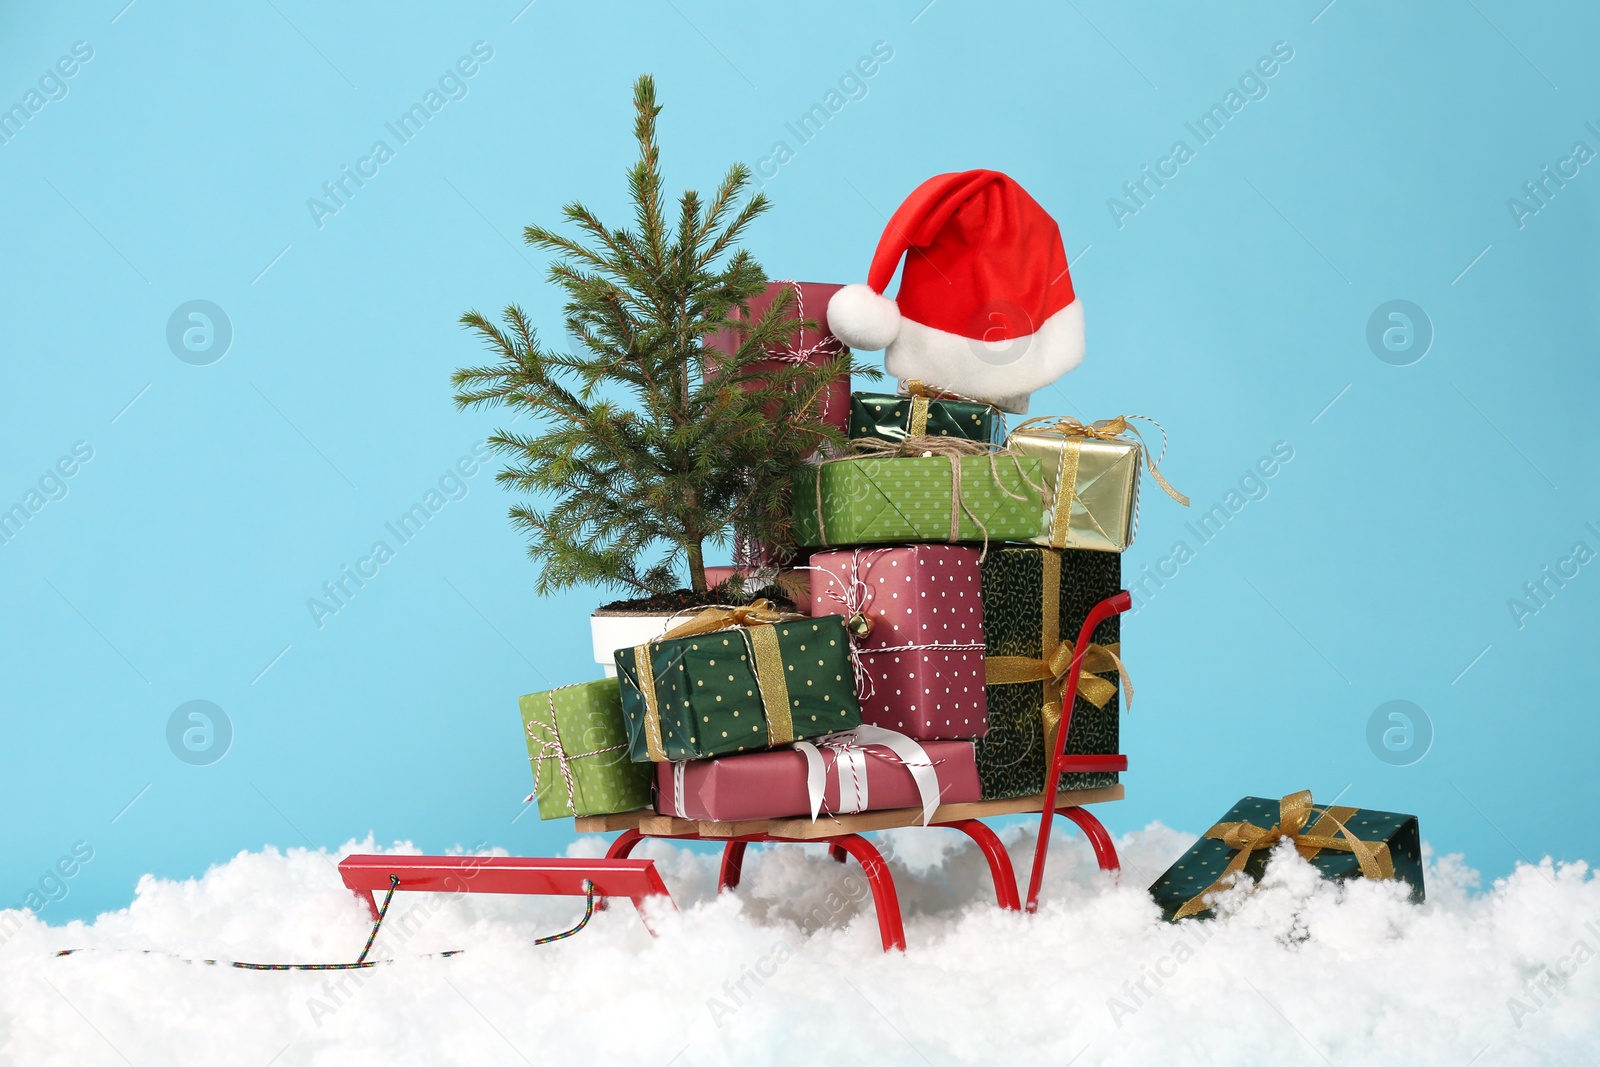 Photo of Sleigh with presents, santa hat and fir tree in artificial snow on light blue background